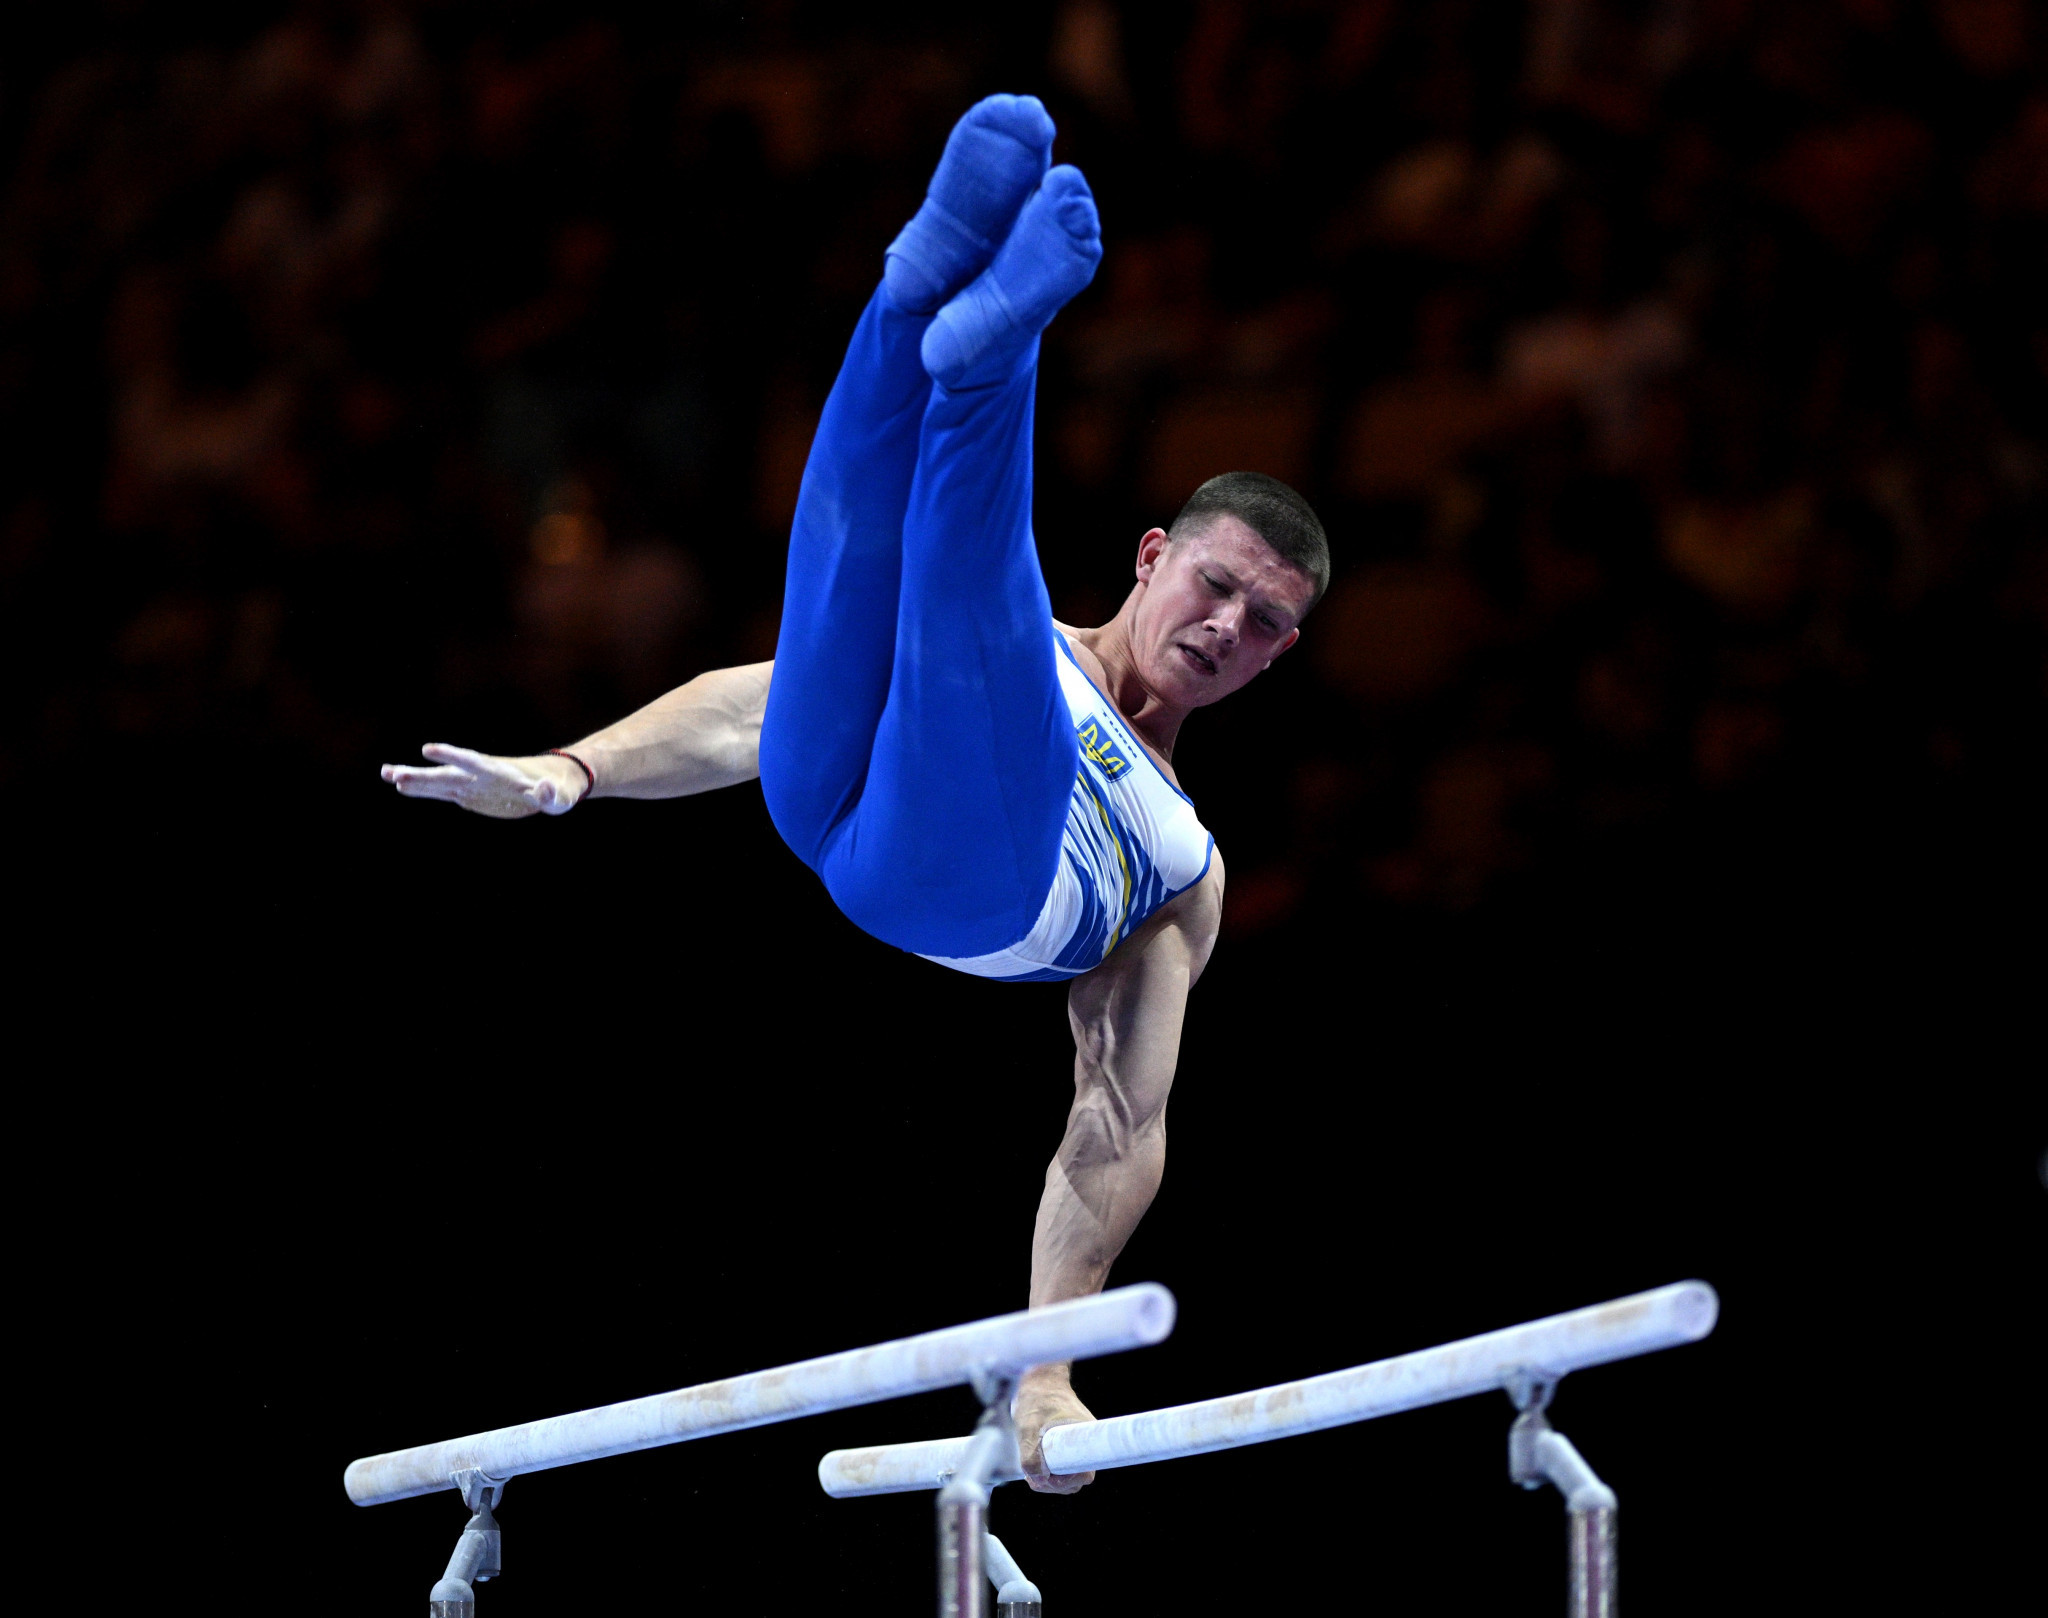 The Ukrainian Gymnastics Federation has refused to participate in November's FIG Congress ©Getty Images